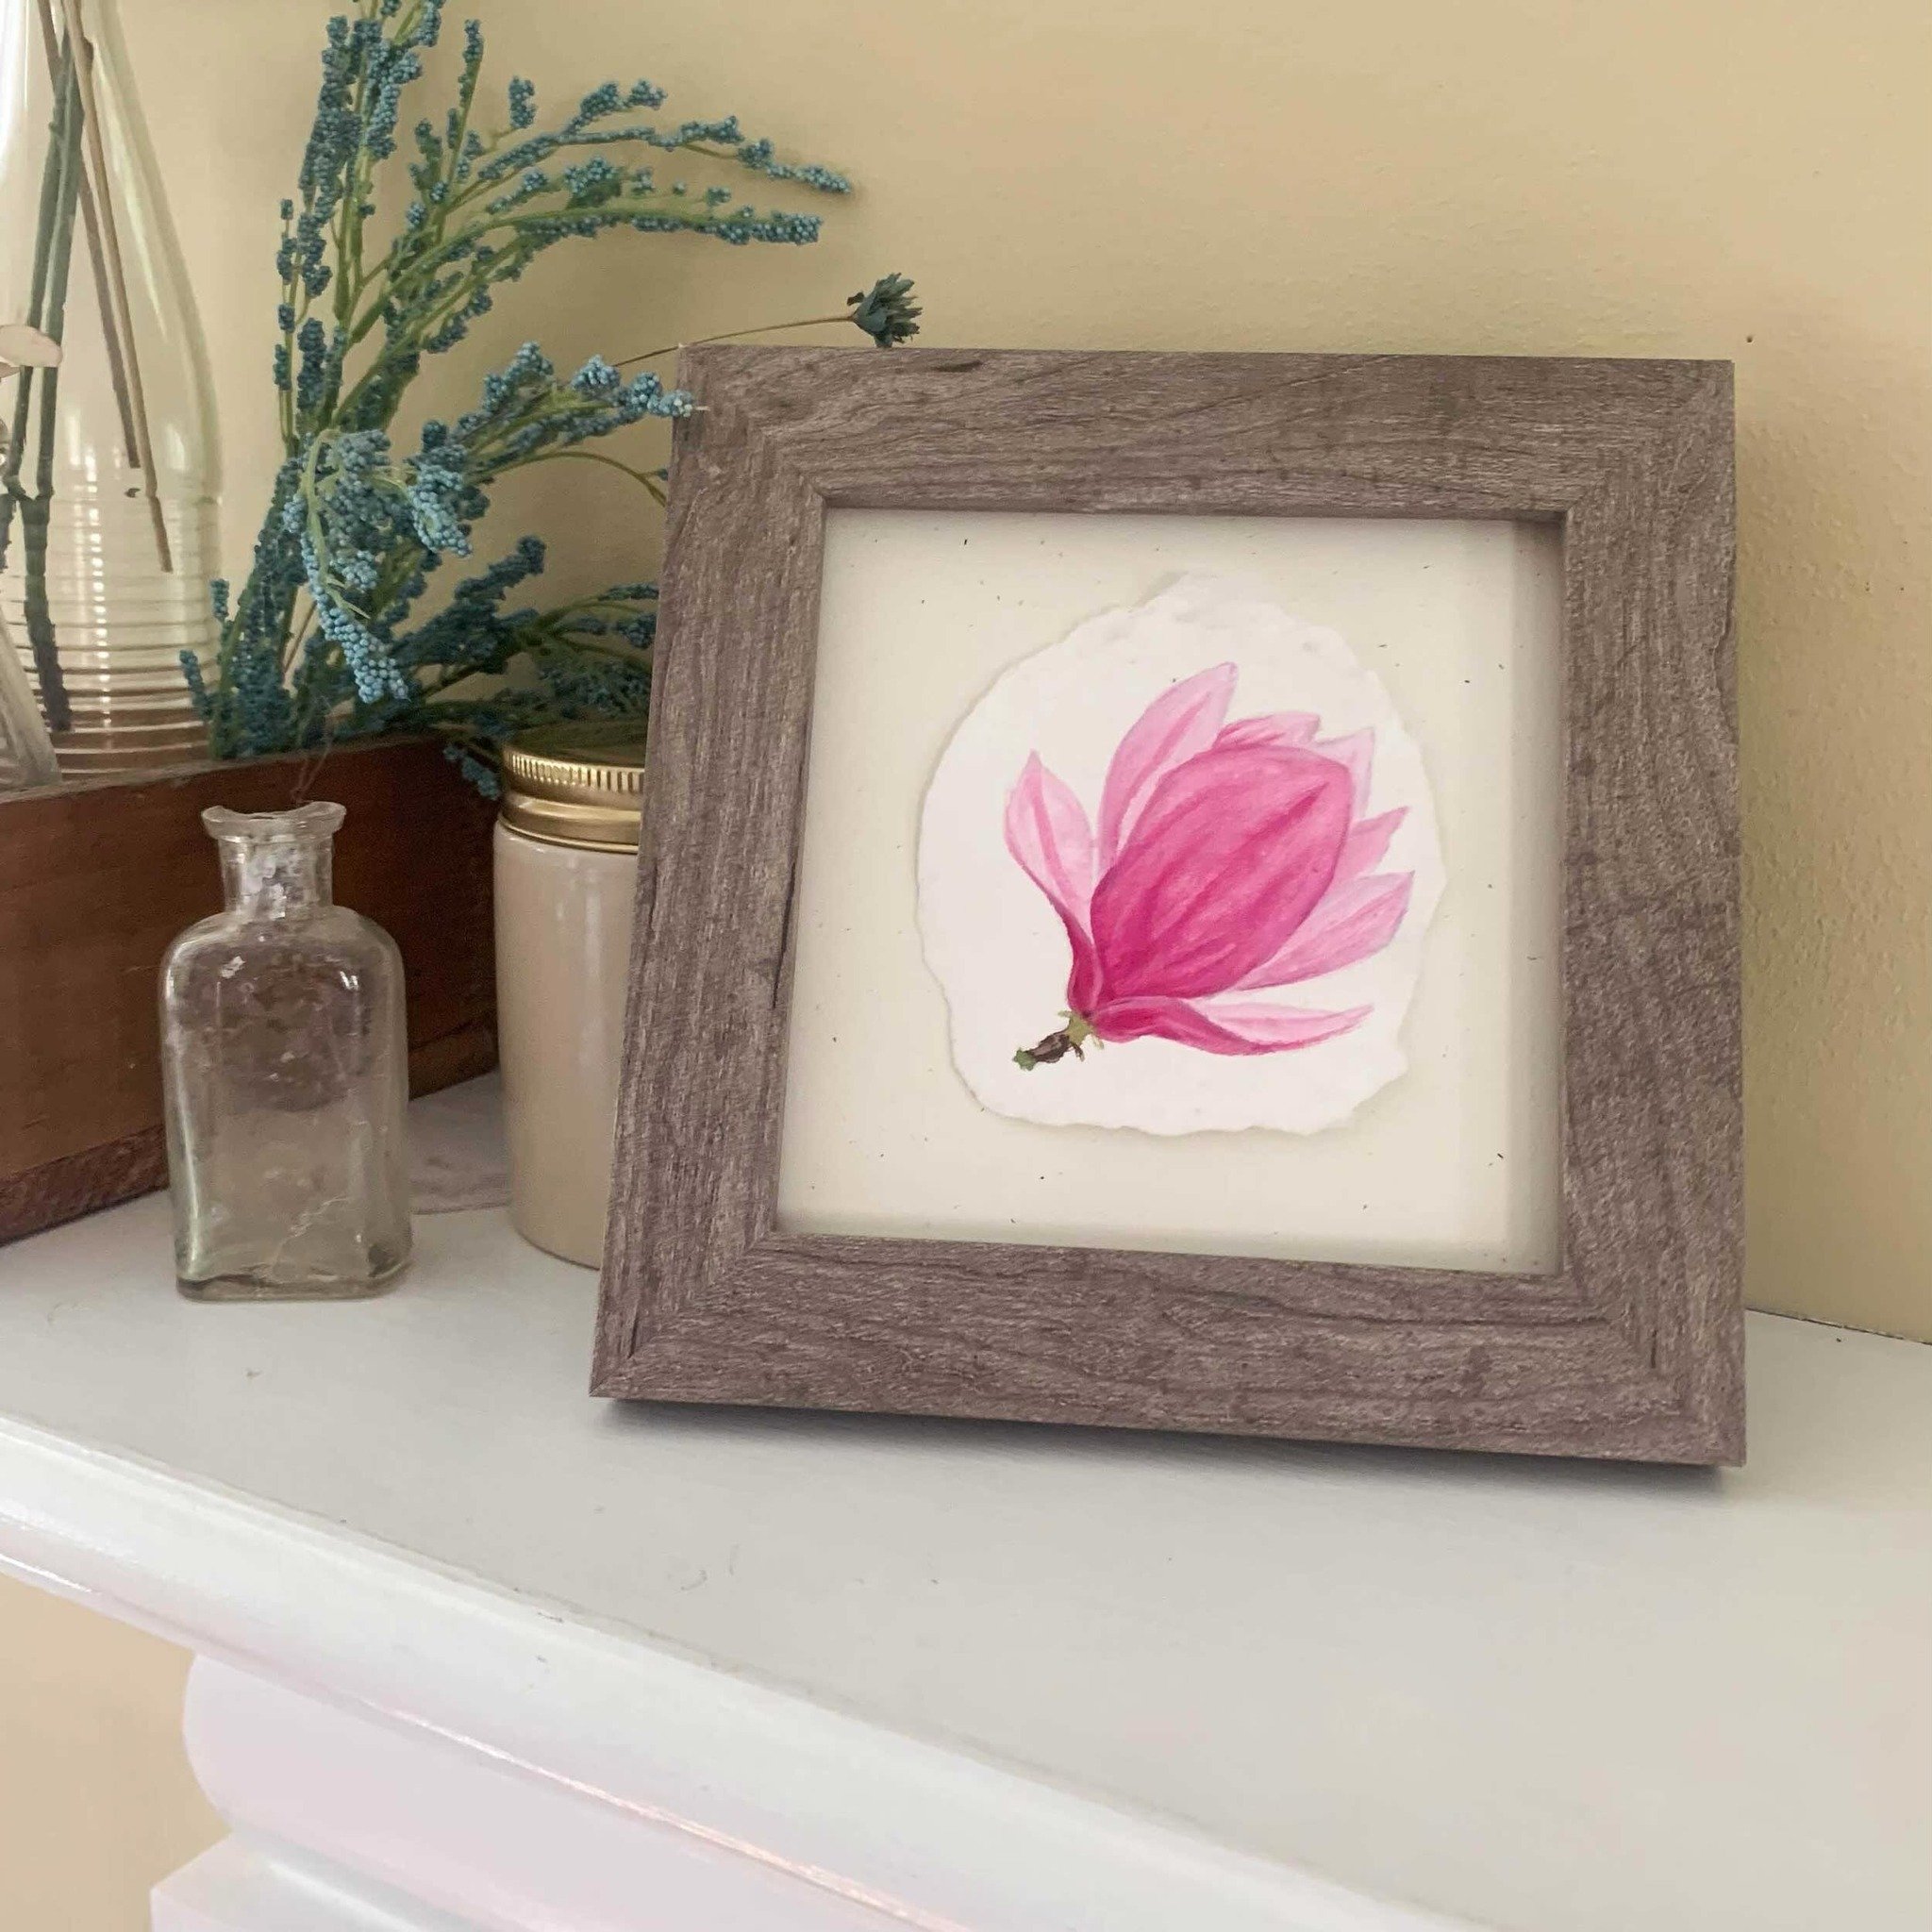 Pretty pink magnolia flower painted in gouache on handmade paper. Mounted inside a distressed frame.
#magnolias #magnoliaflower #magnoliapainting #flowerpainting #framedartwork #gouachepainting #botanicalart #inspiredbyflowers #artforyourhome #spring